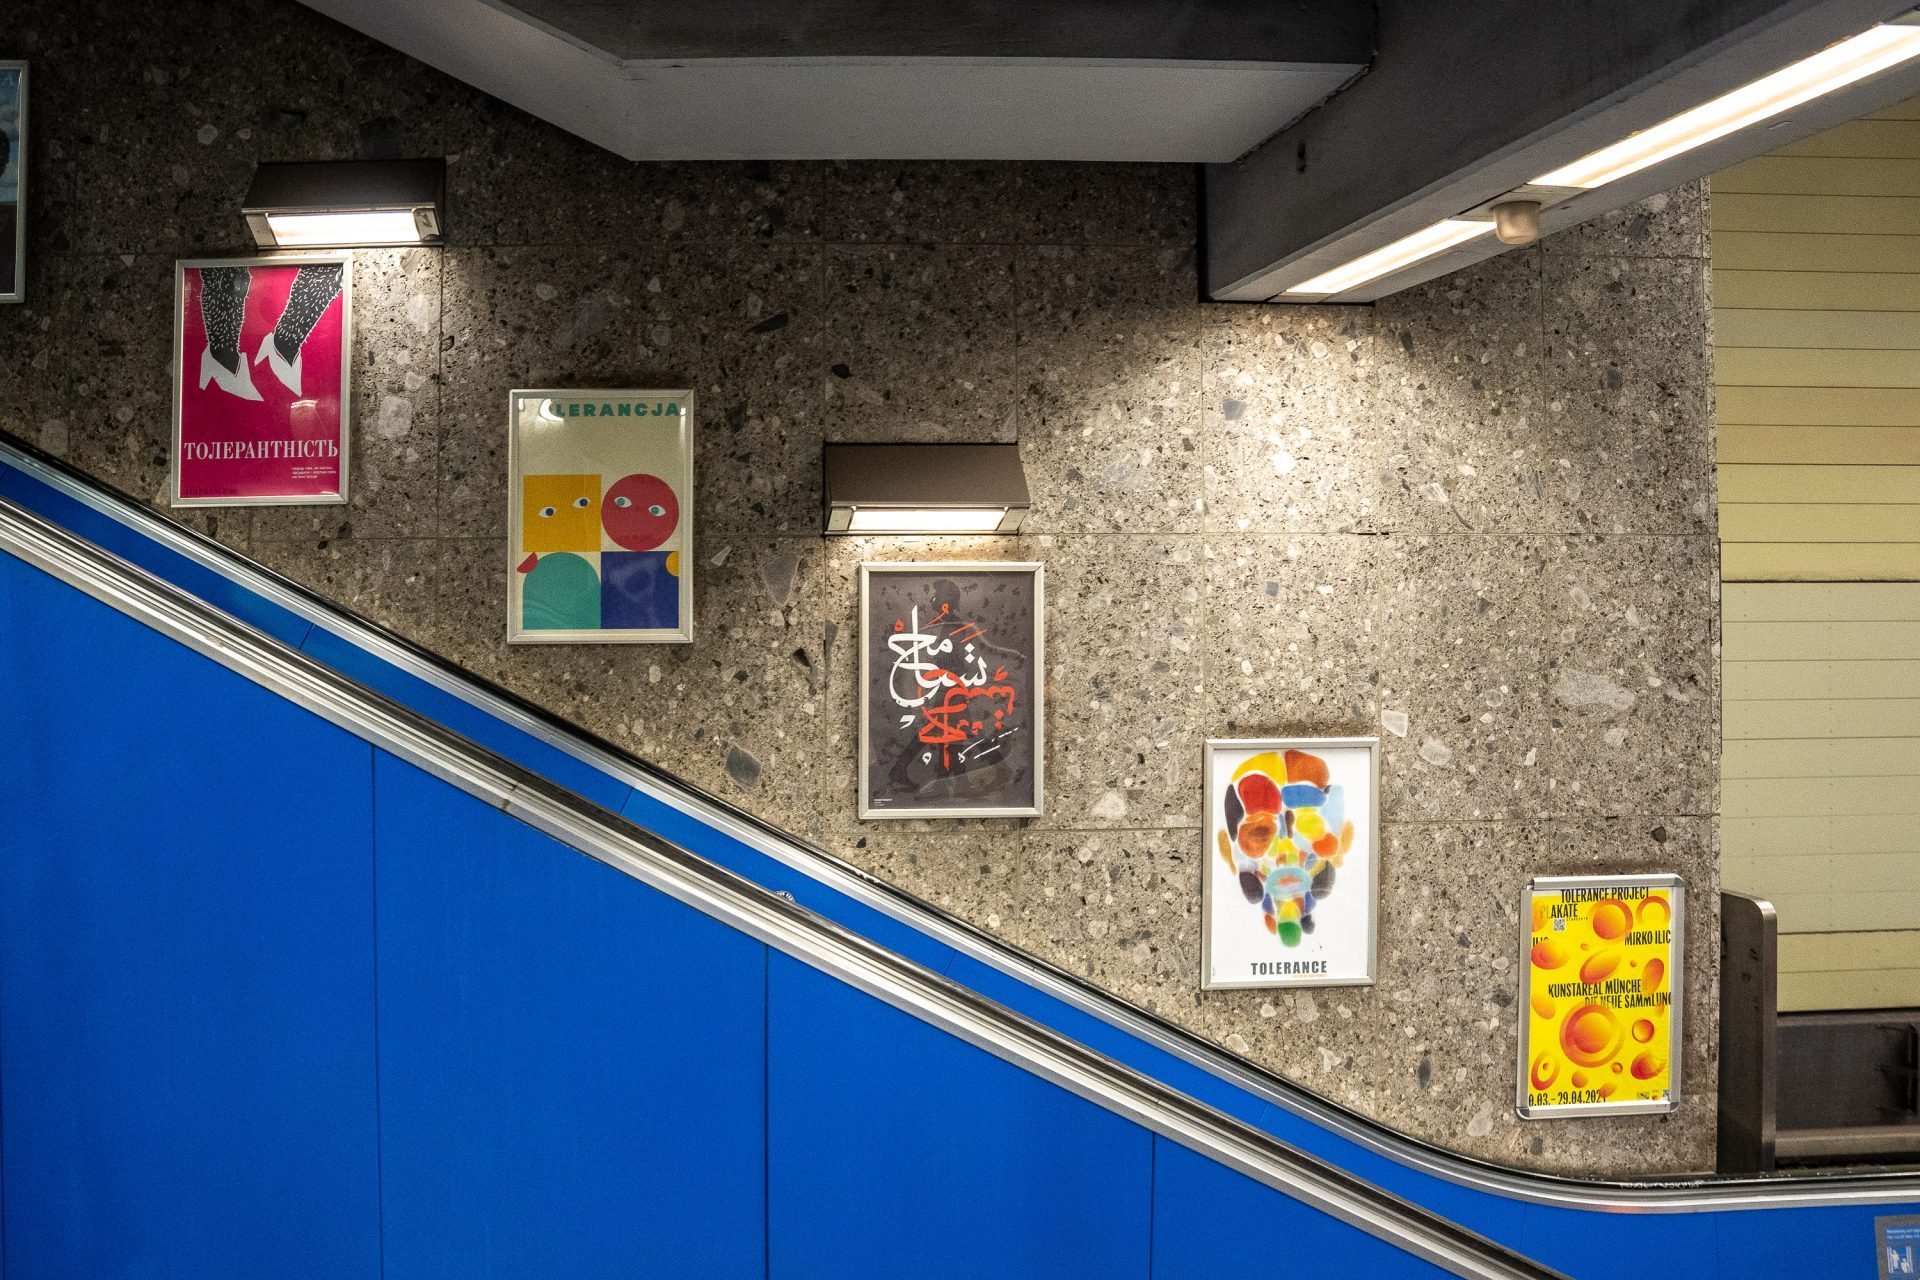 5 different posters from the exhibition hang above a blue escalator.